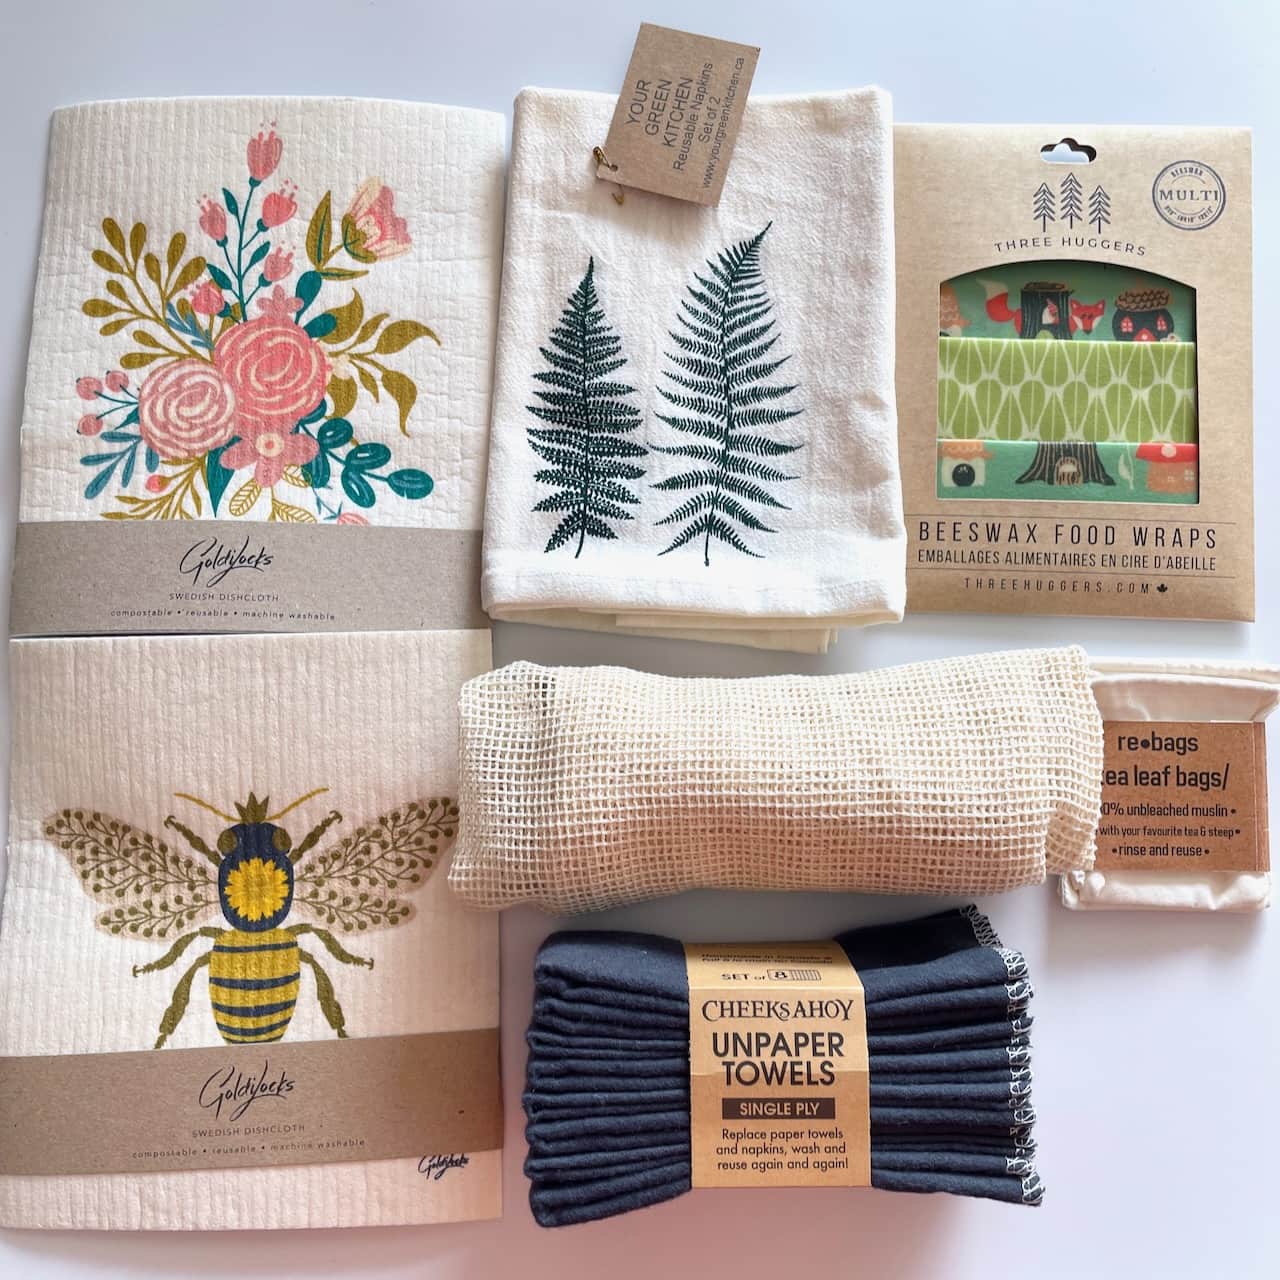 Sustainable Organic Cotton Towels - Going Zero Waste